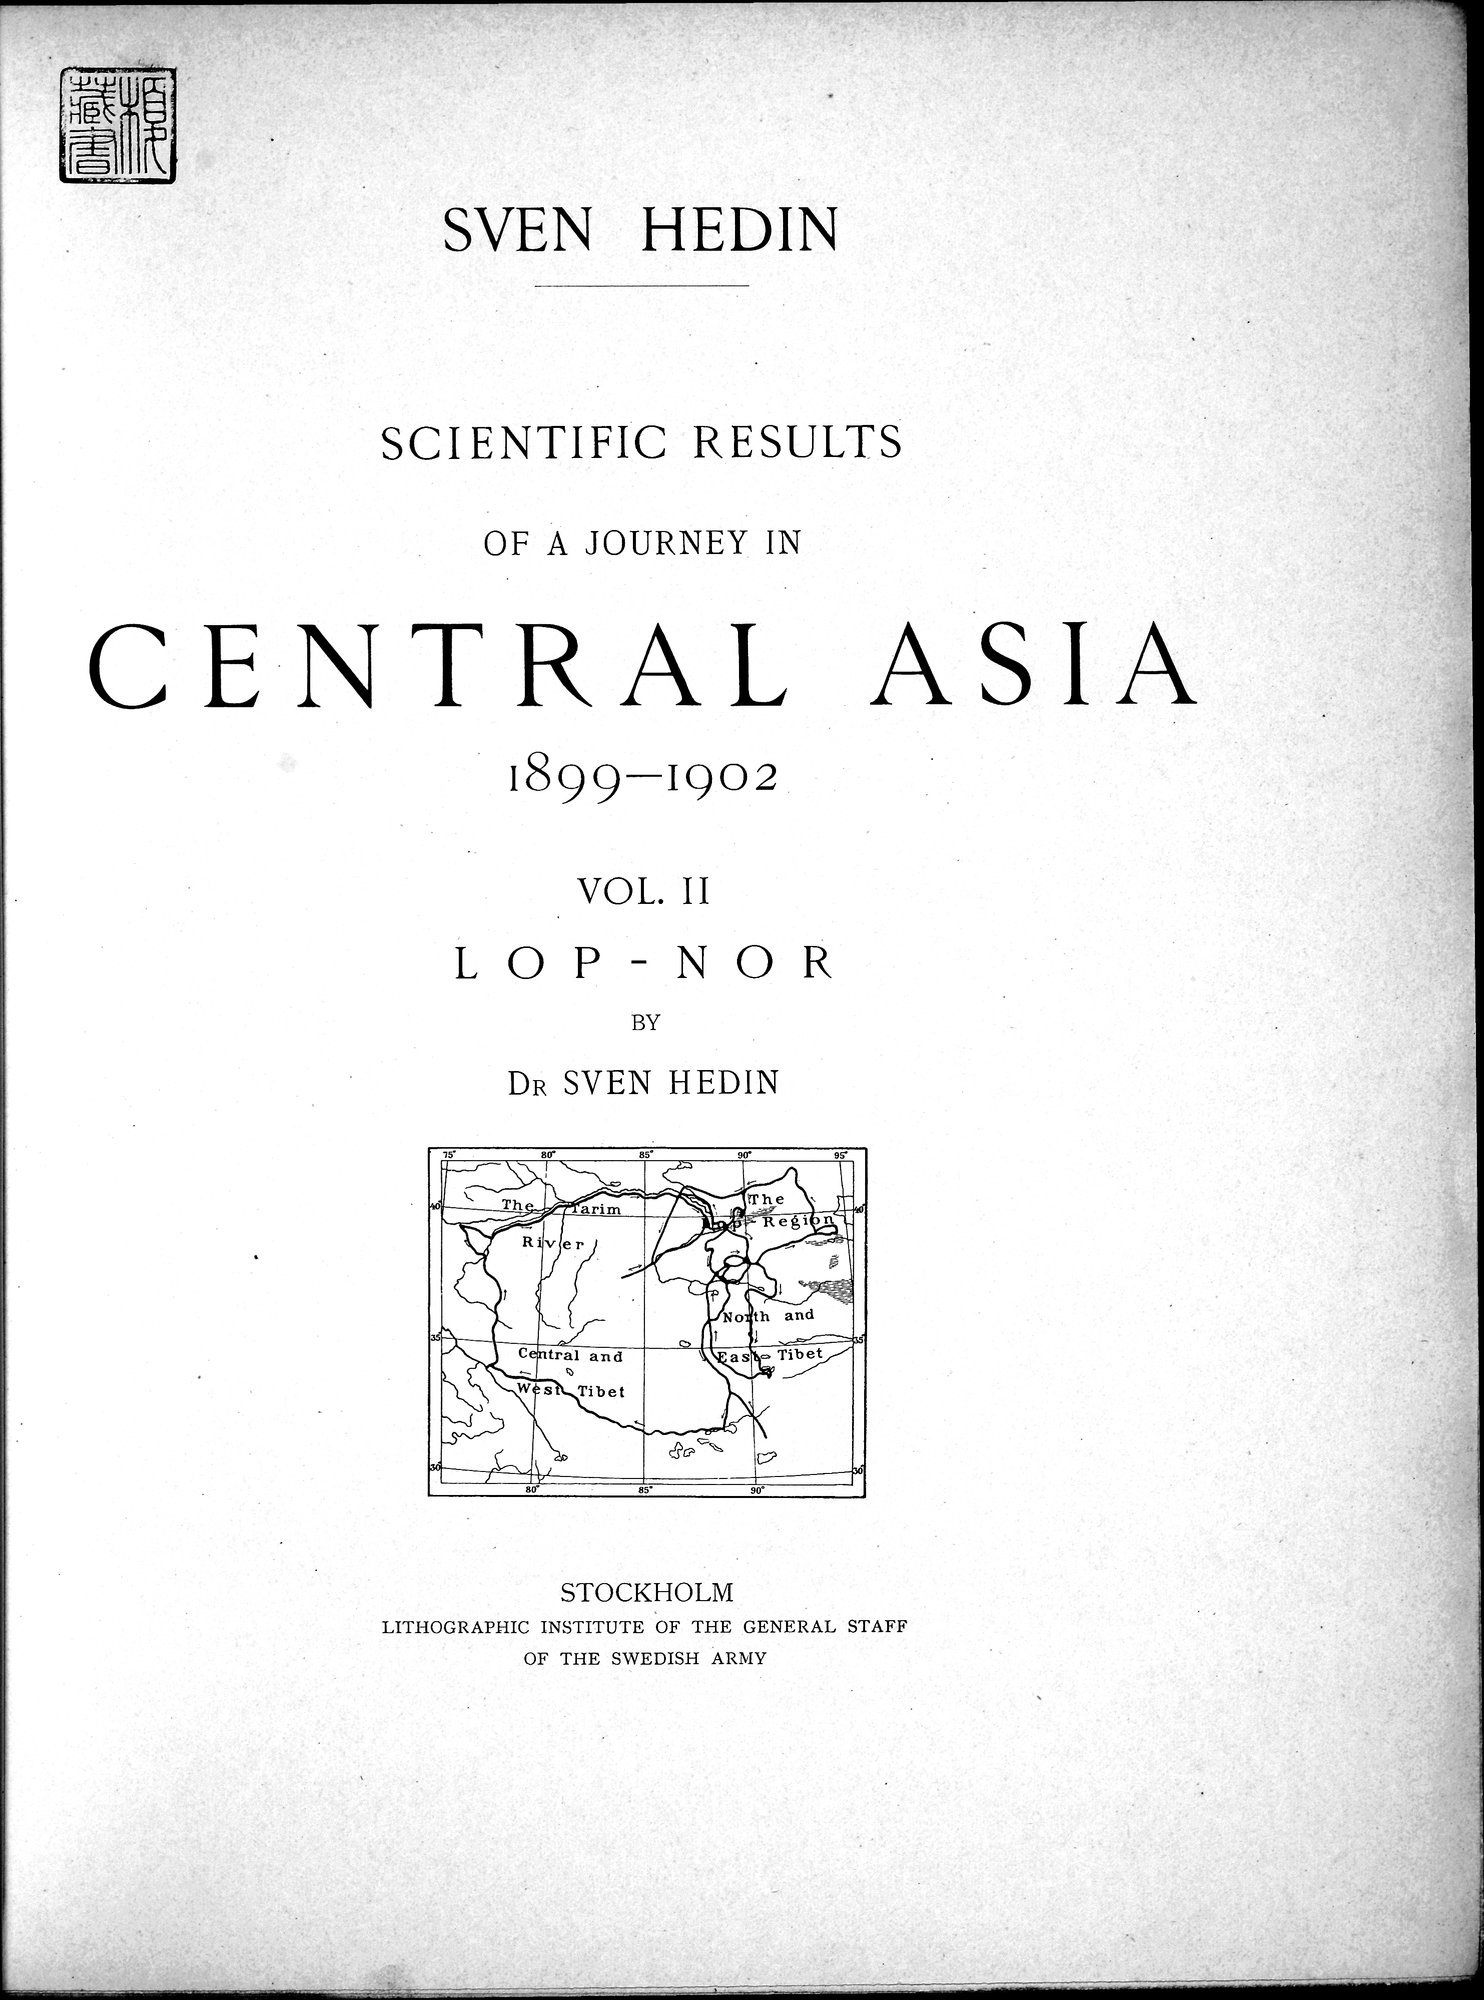 Scientific Results of a Journey in Central Asia, 1899-1902 : vol.2 / 9 ページ（白黒高解像度画像）